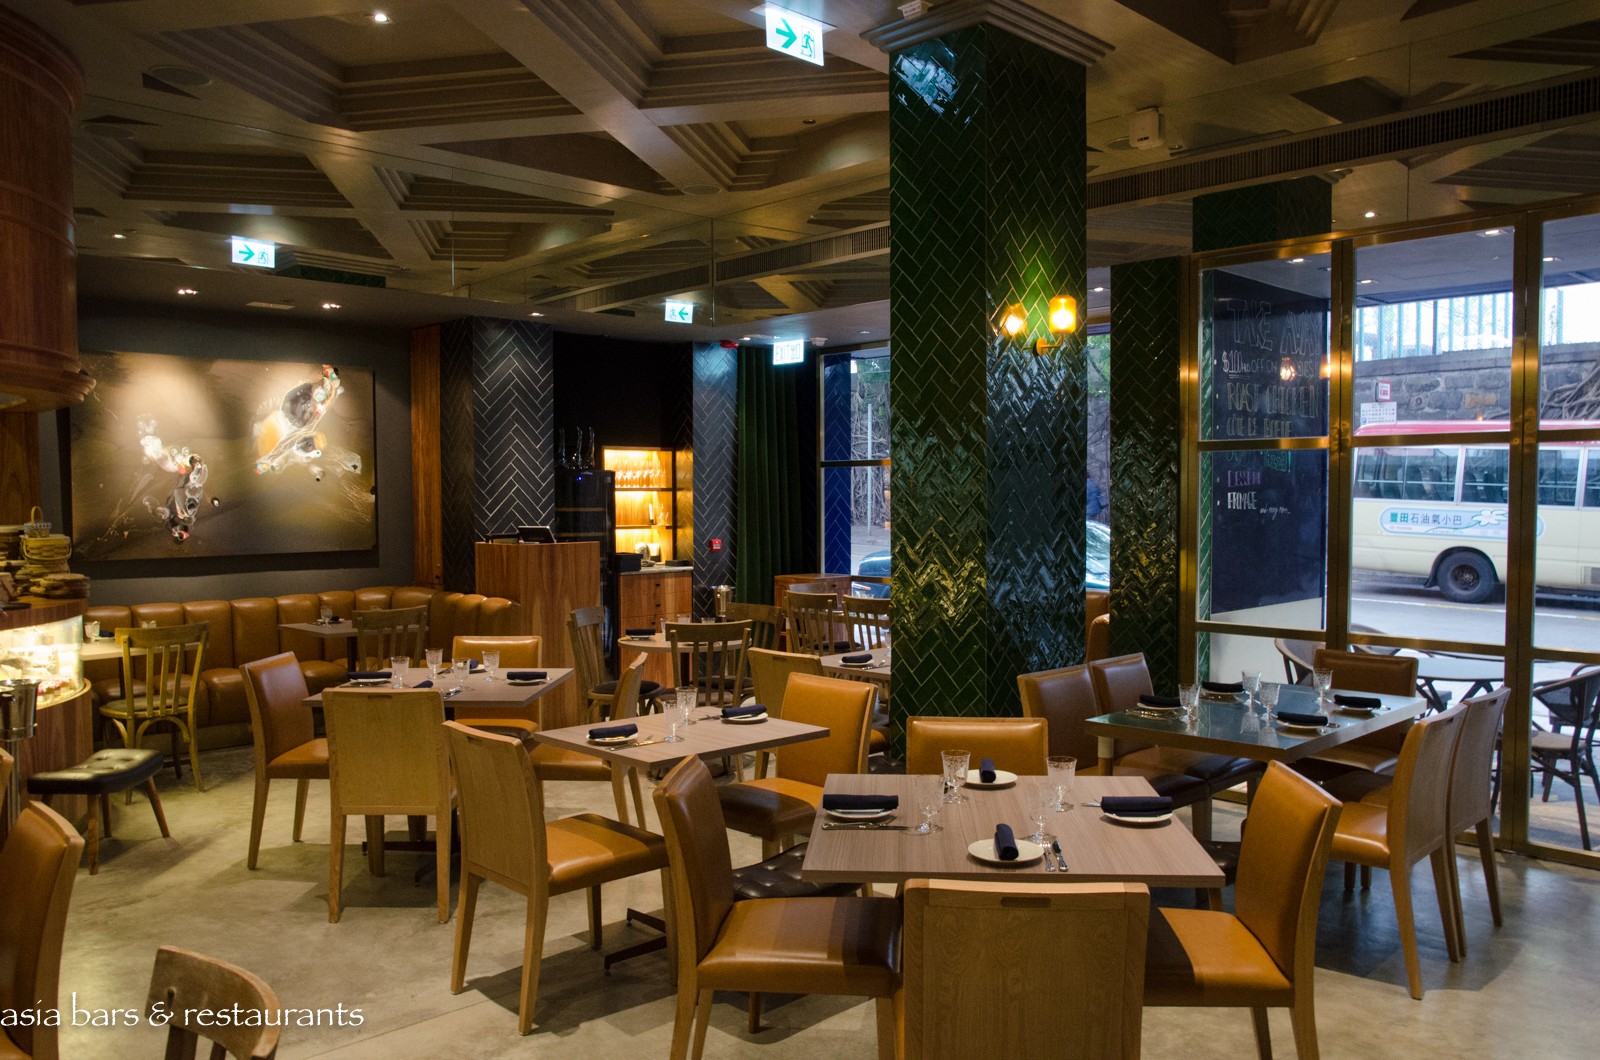 Picnic on Forbes – French cafe in Hong Kong | Asia Bars & Restaurants